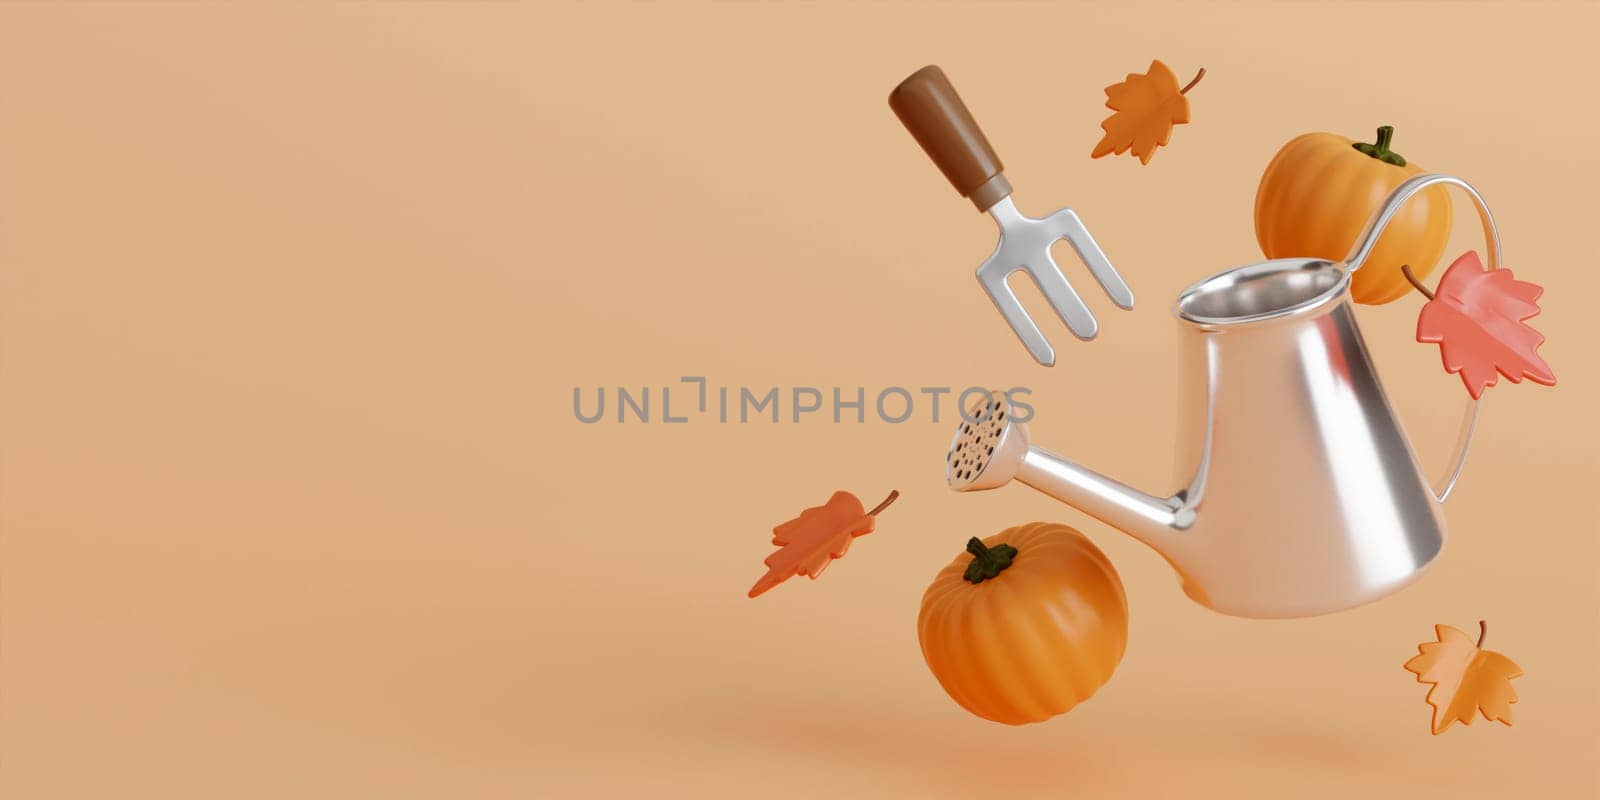 3d Autumn with watering can, leaves, pumpkins, and Shoveling fork background. 3d Fall leaves for the design of Fall banners, posters, advertisements, cards, sales. 3d render illustration..